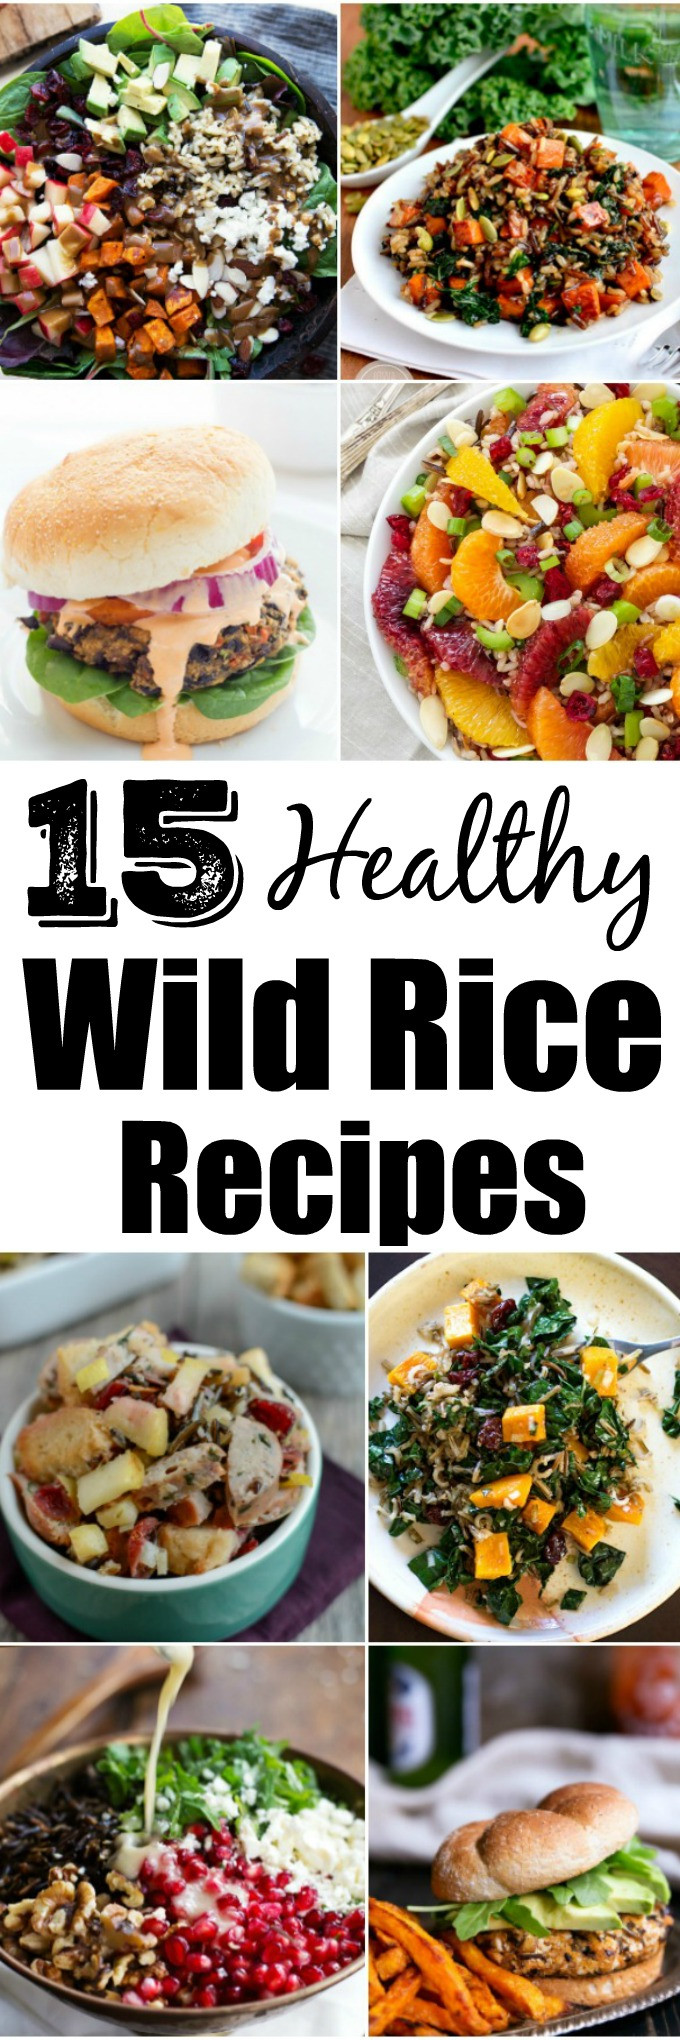 Healthy Dinner Side Dishes Recipes
 15 Healthy Wild Rice Recipes